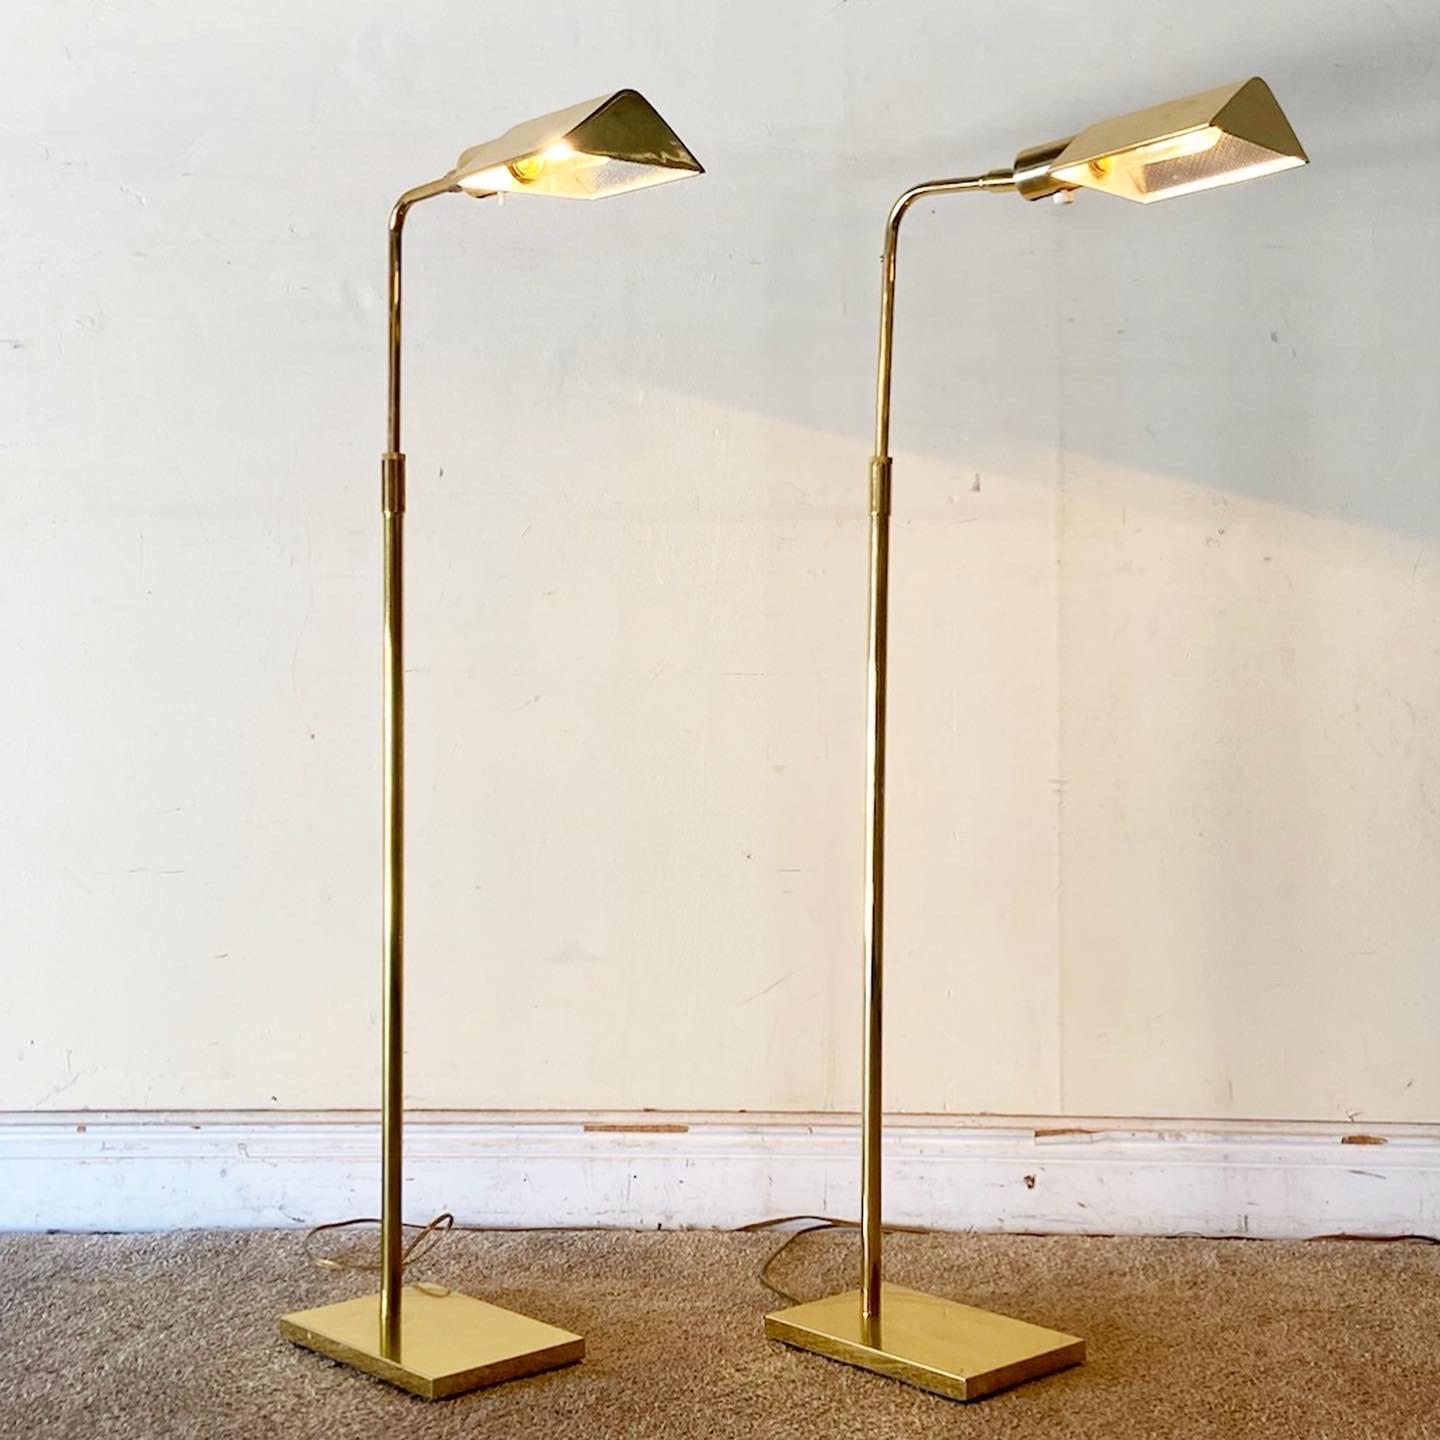 Incredible pair of Mid-Century Modern adjustable pharmacy lamps. Each features a folded finish with a rectangular base.

Extends from 35”H to 46”H.